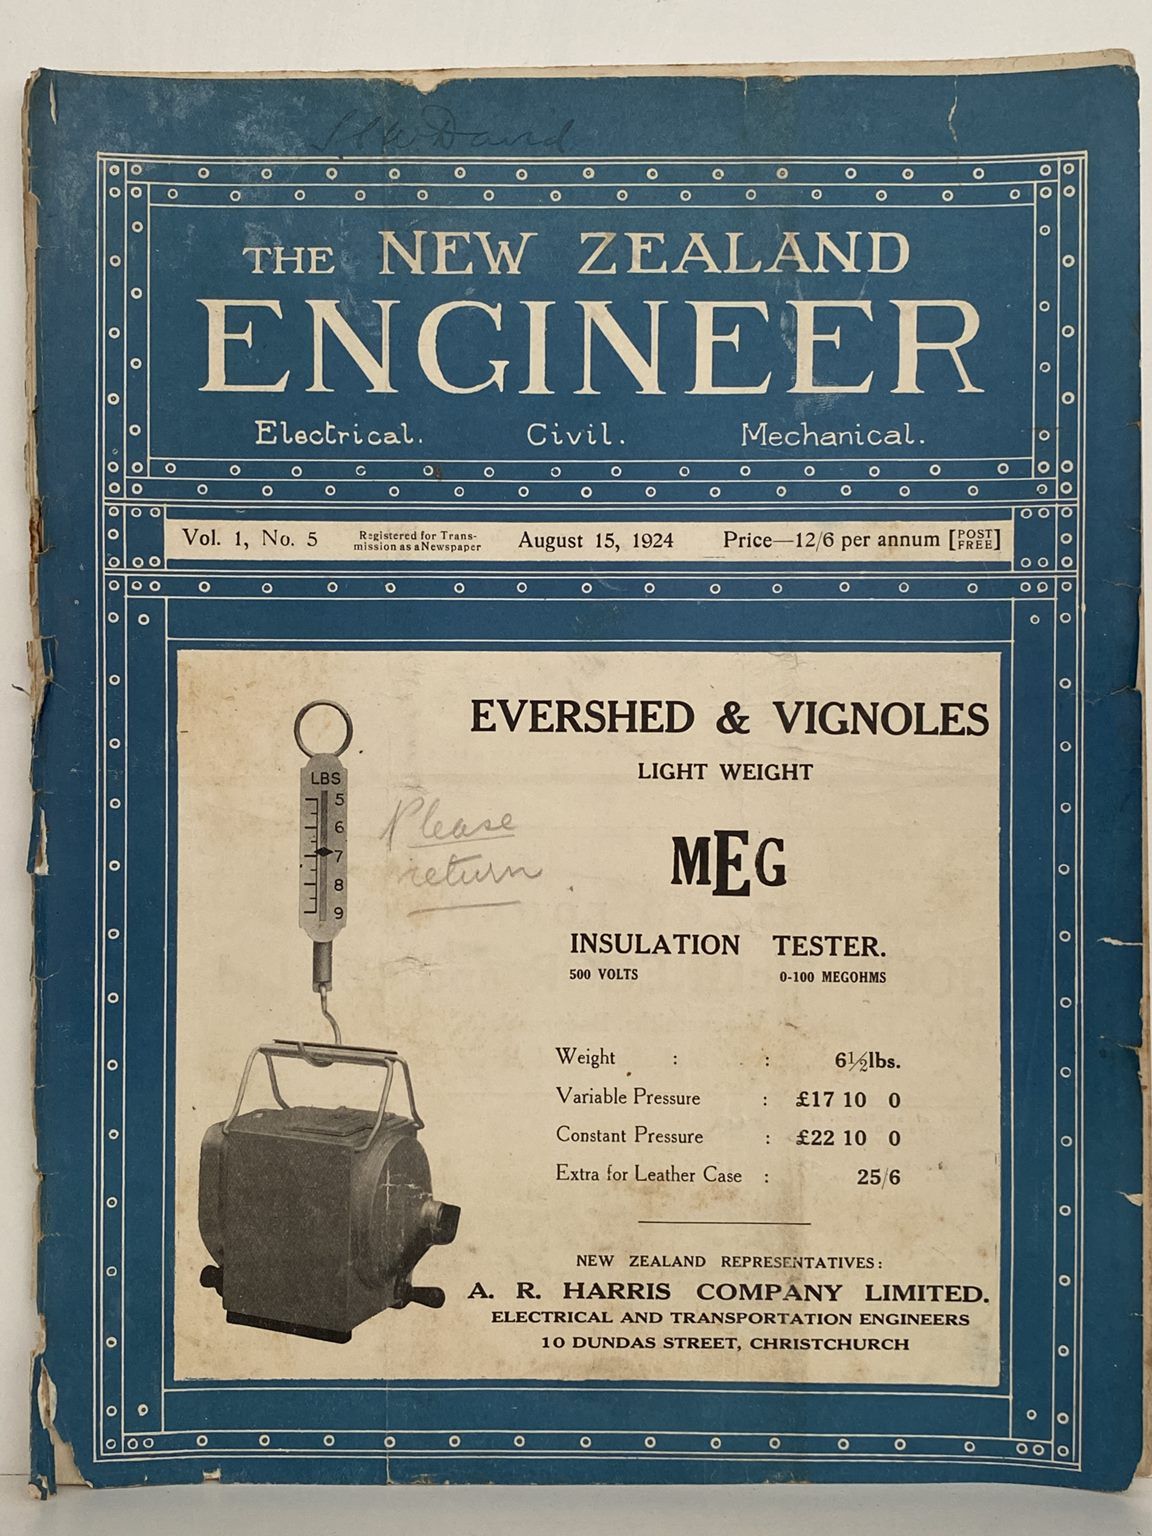 OLD MAGAZINE: The New Zealand Engineer Vol. 1, No. 5 - 15 August 1924